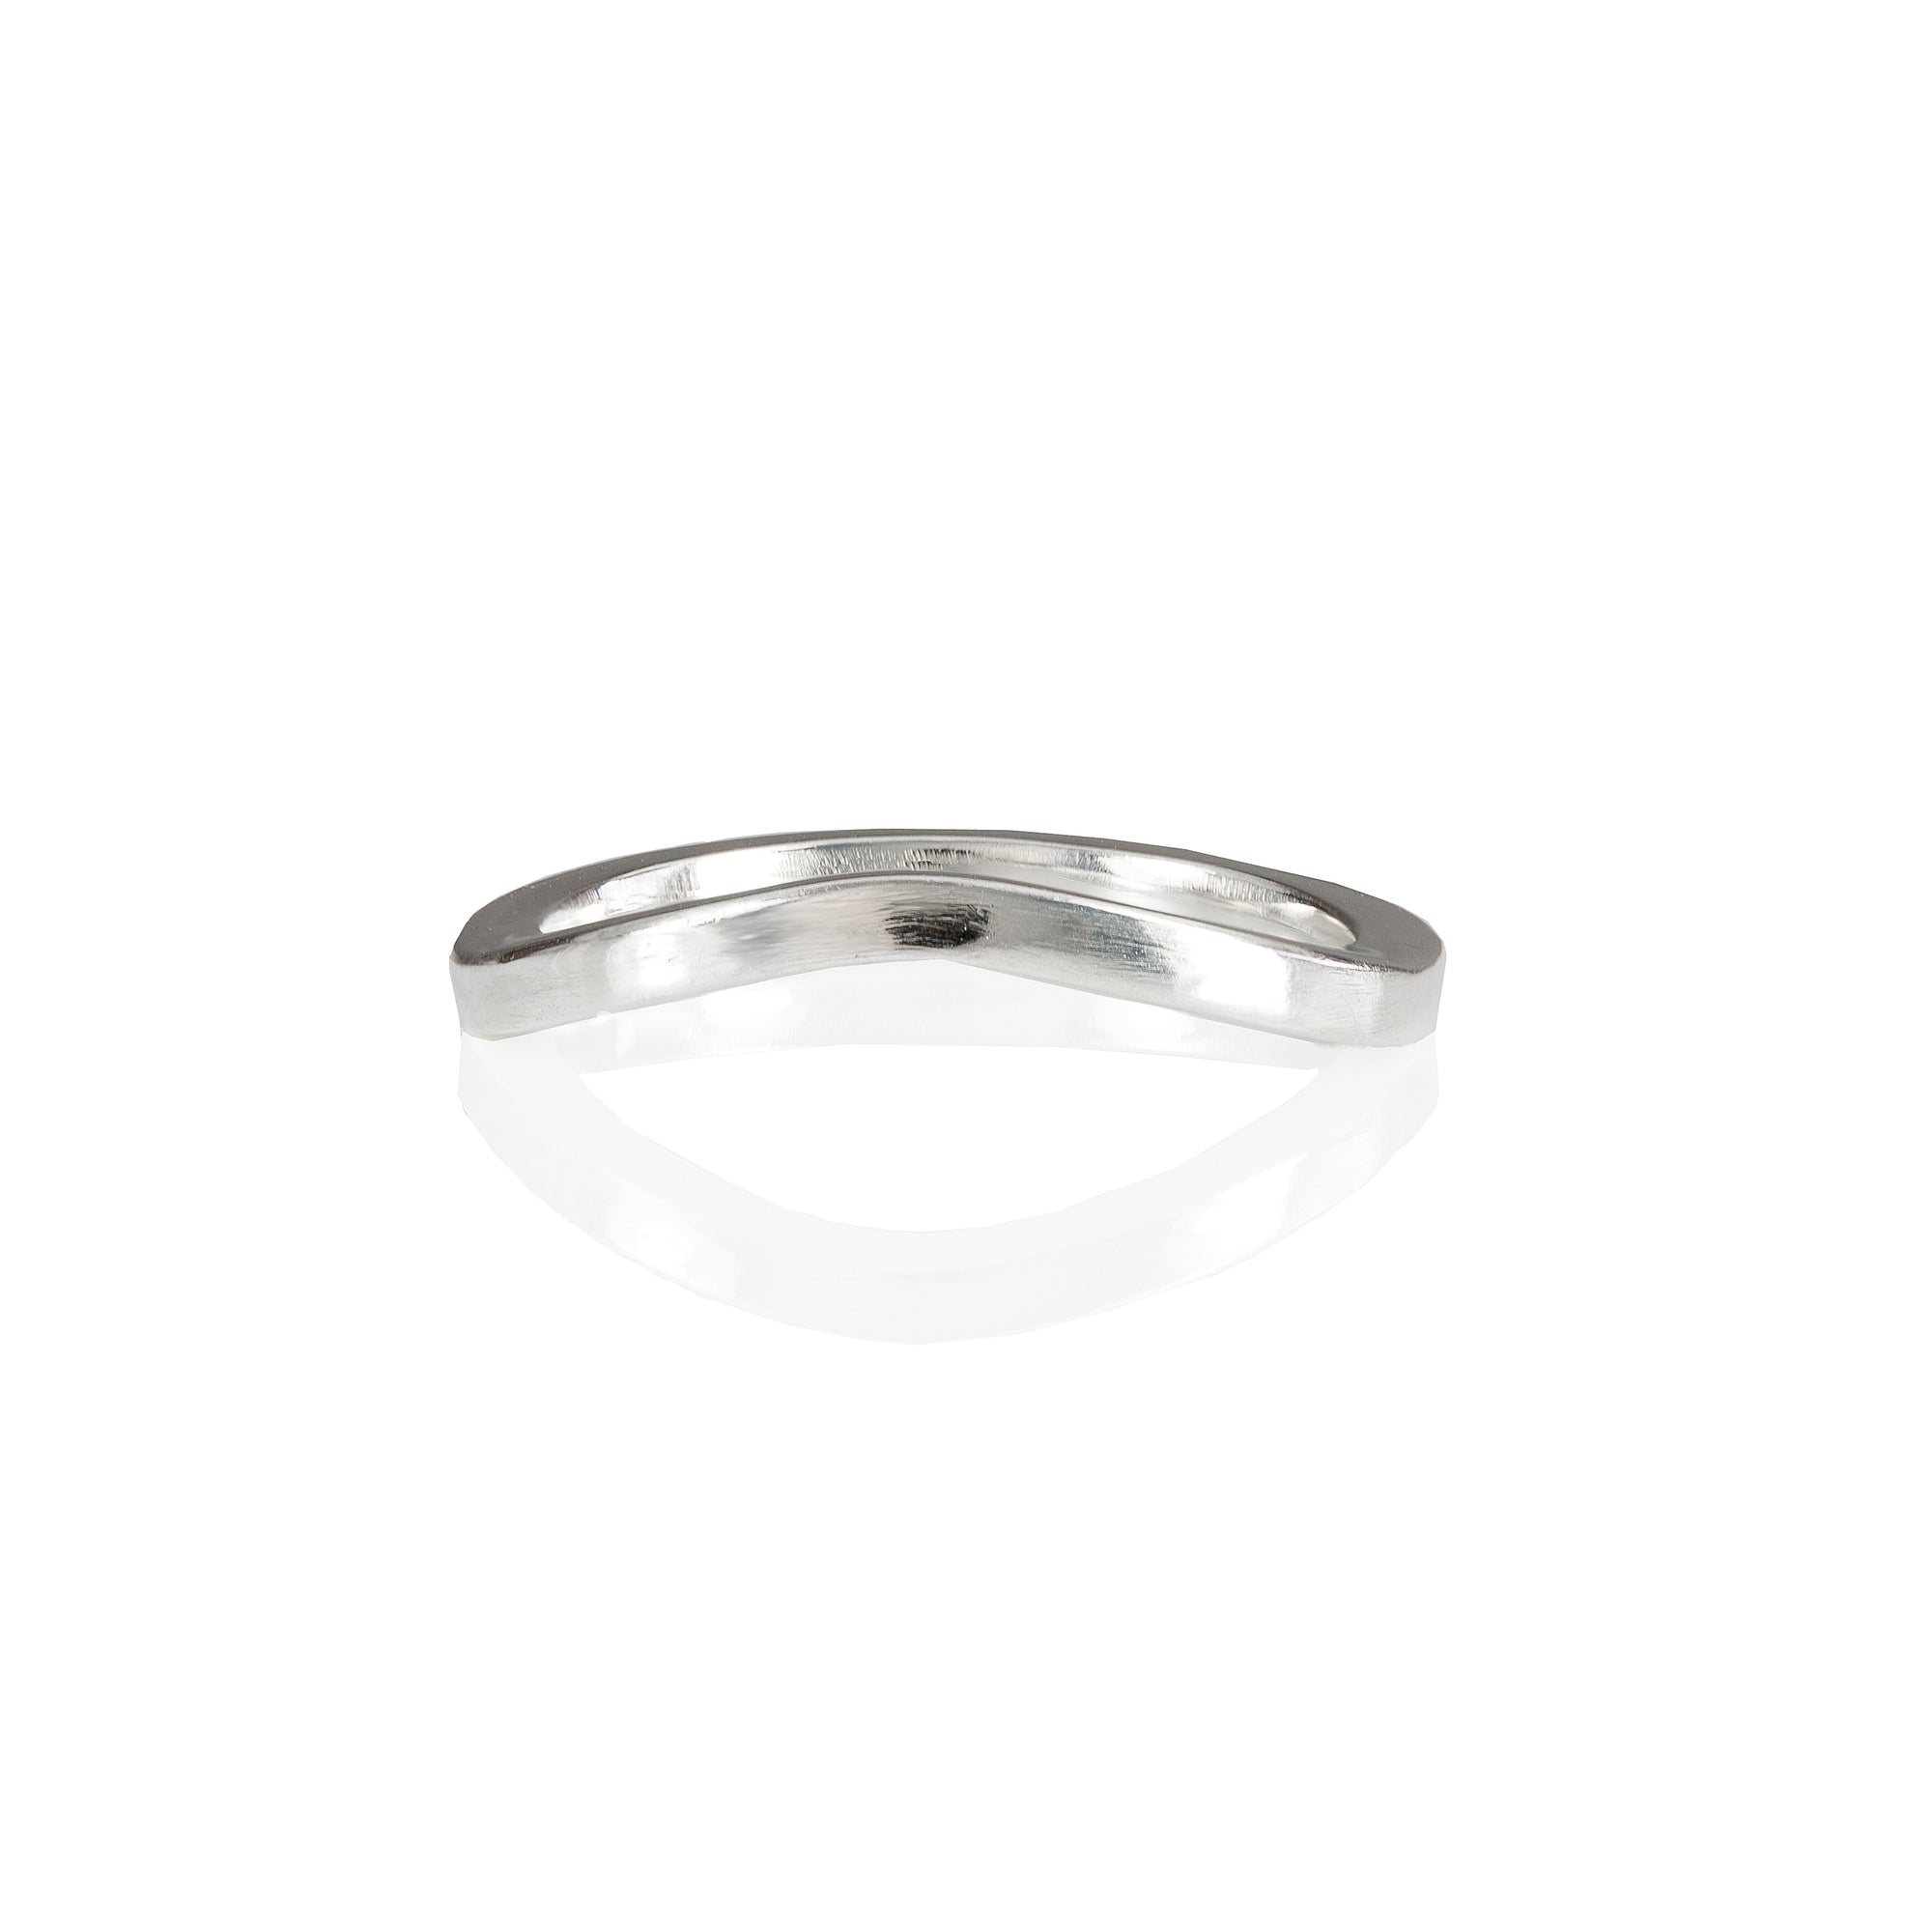 2mm curved wedding band in 18ct Gold